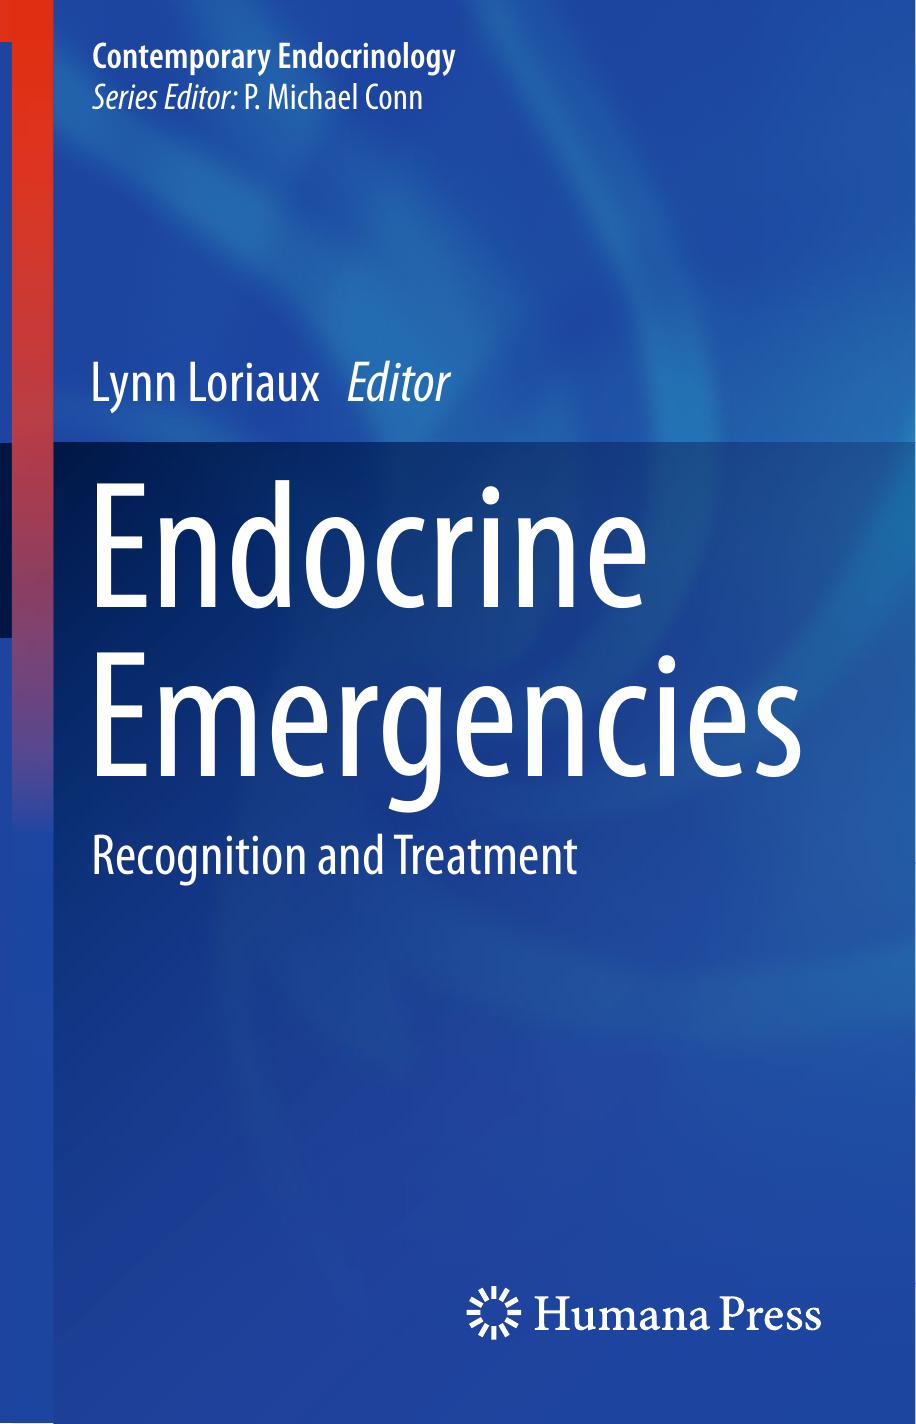 ENDOCRINE EMERGENCIES-RECOGN AND TREATMENT 2014